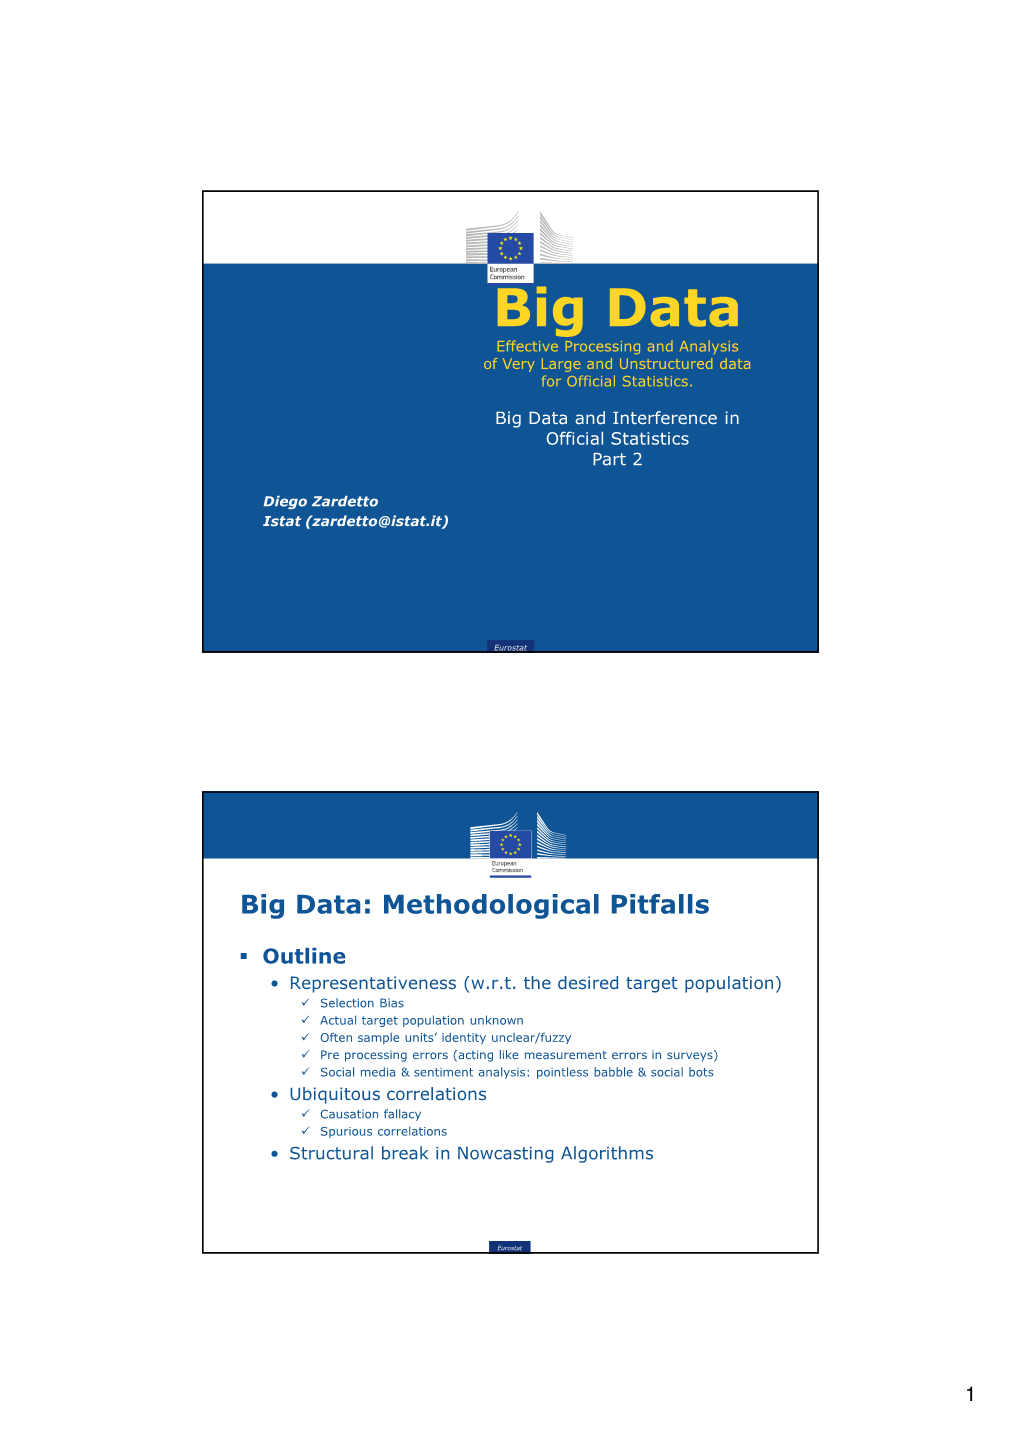 Big Data Effective Processing and Analysis of Very Large and Unstructured Data for Official Statistics